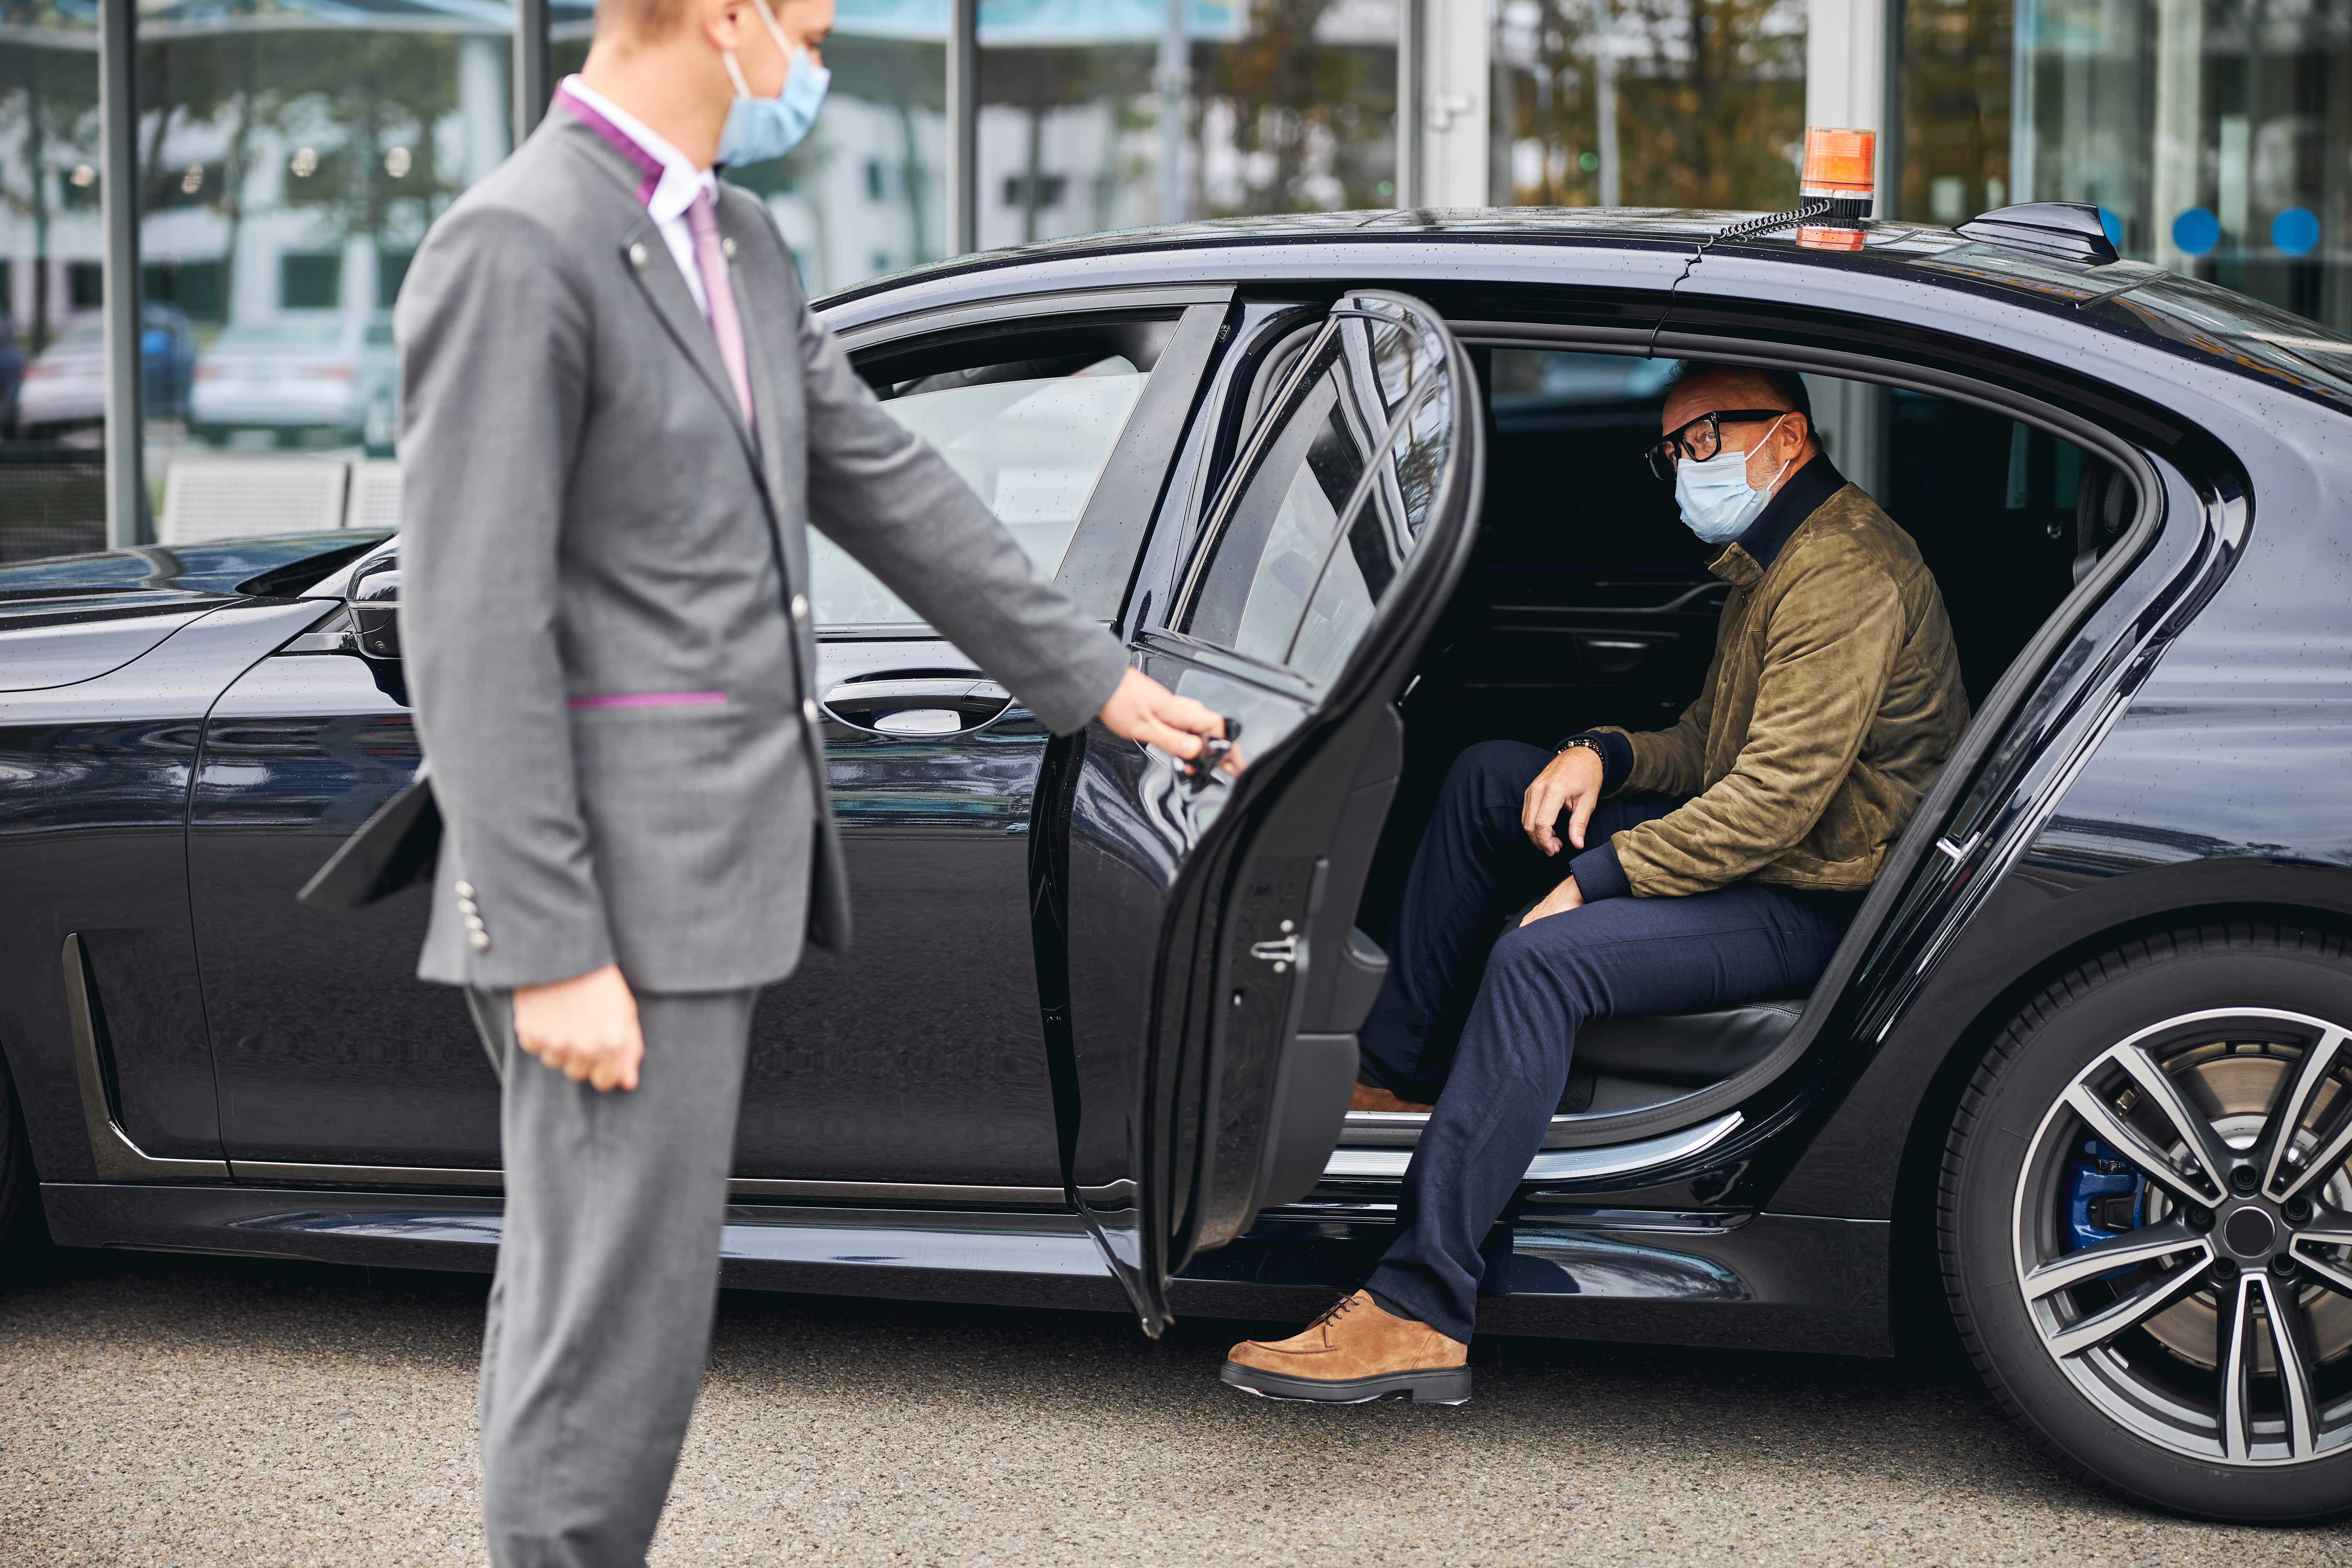 Things to Keep in Mind Before Hiring a Chauffeur Service